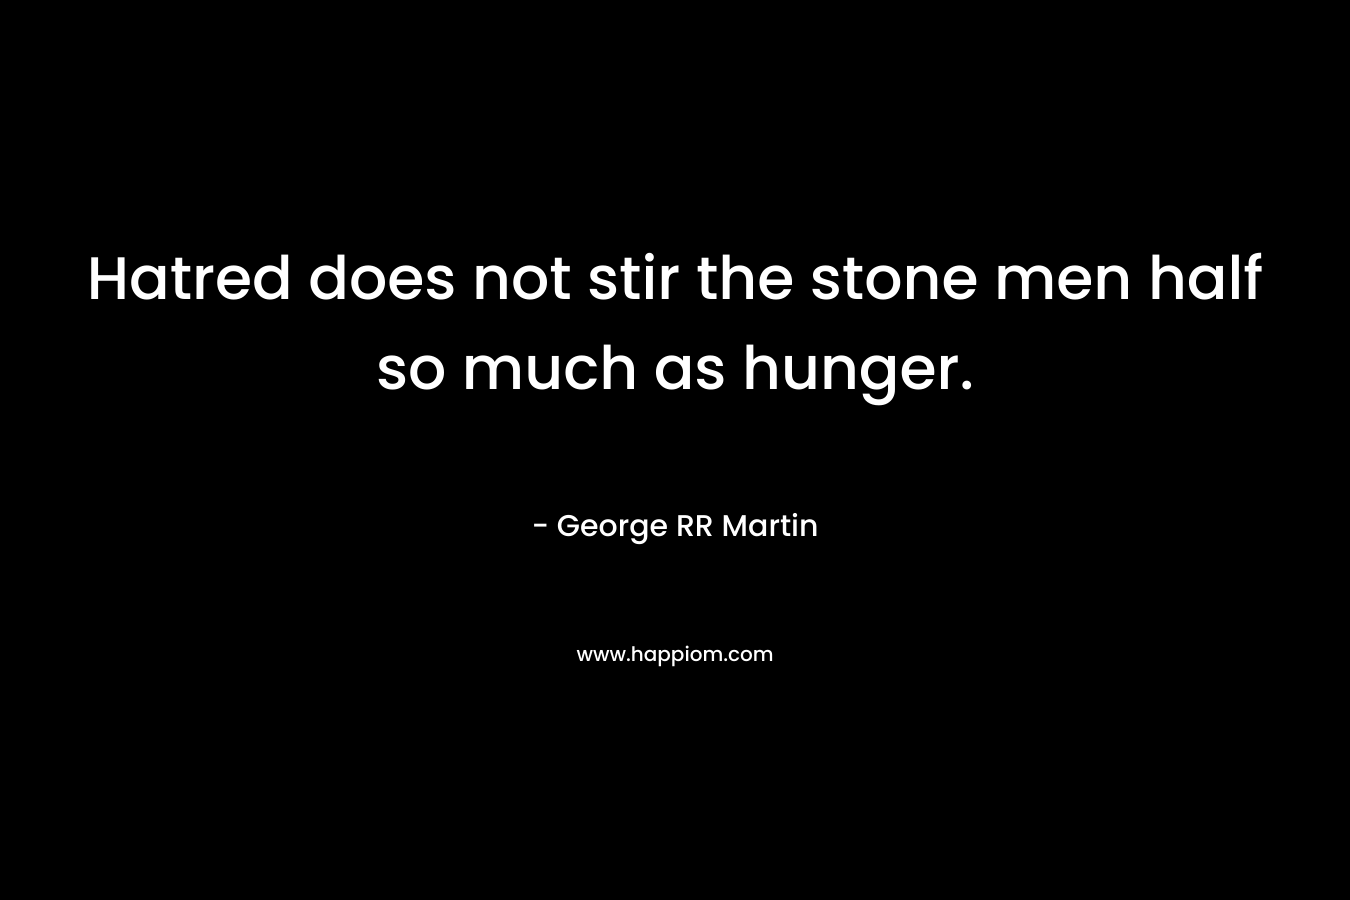 Hatred does not stir the stone men half so much as hunger. – George RR Martin